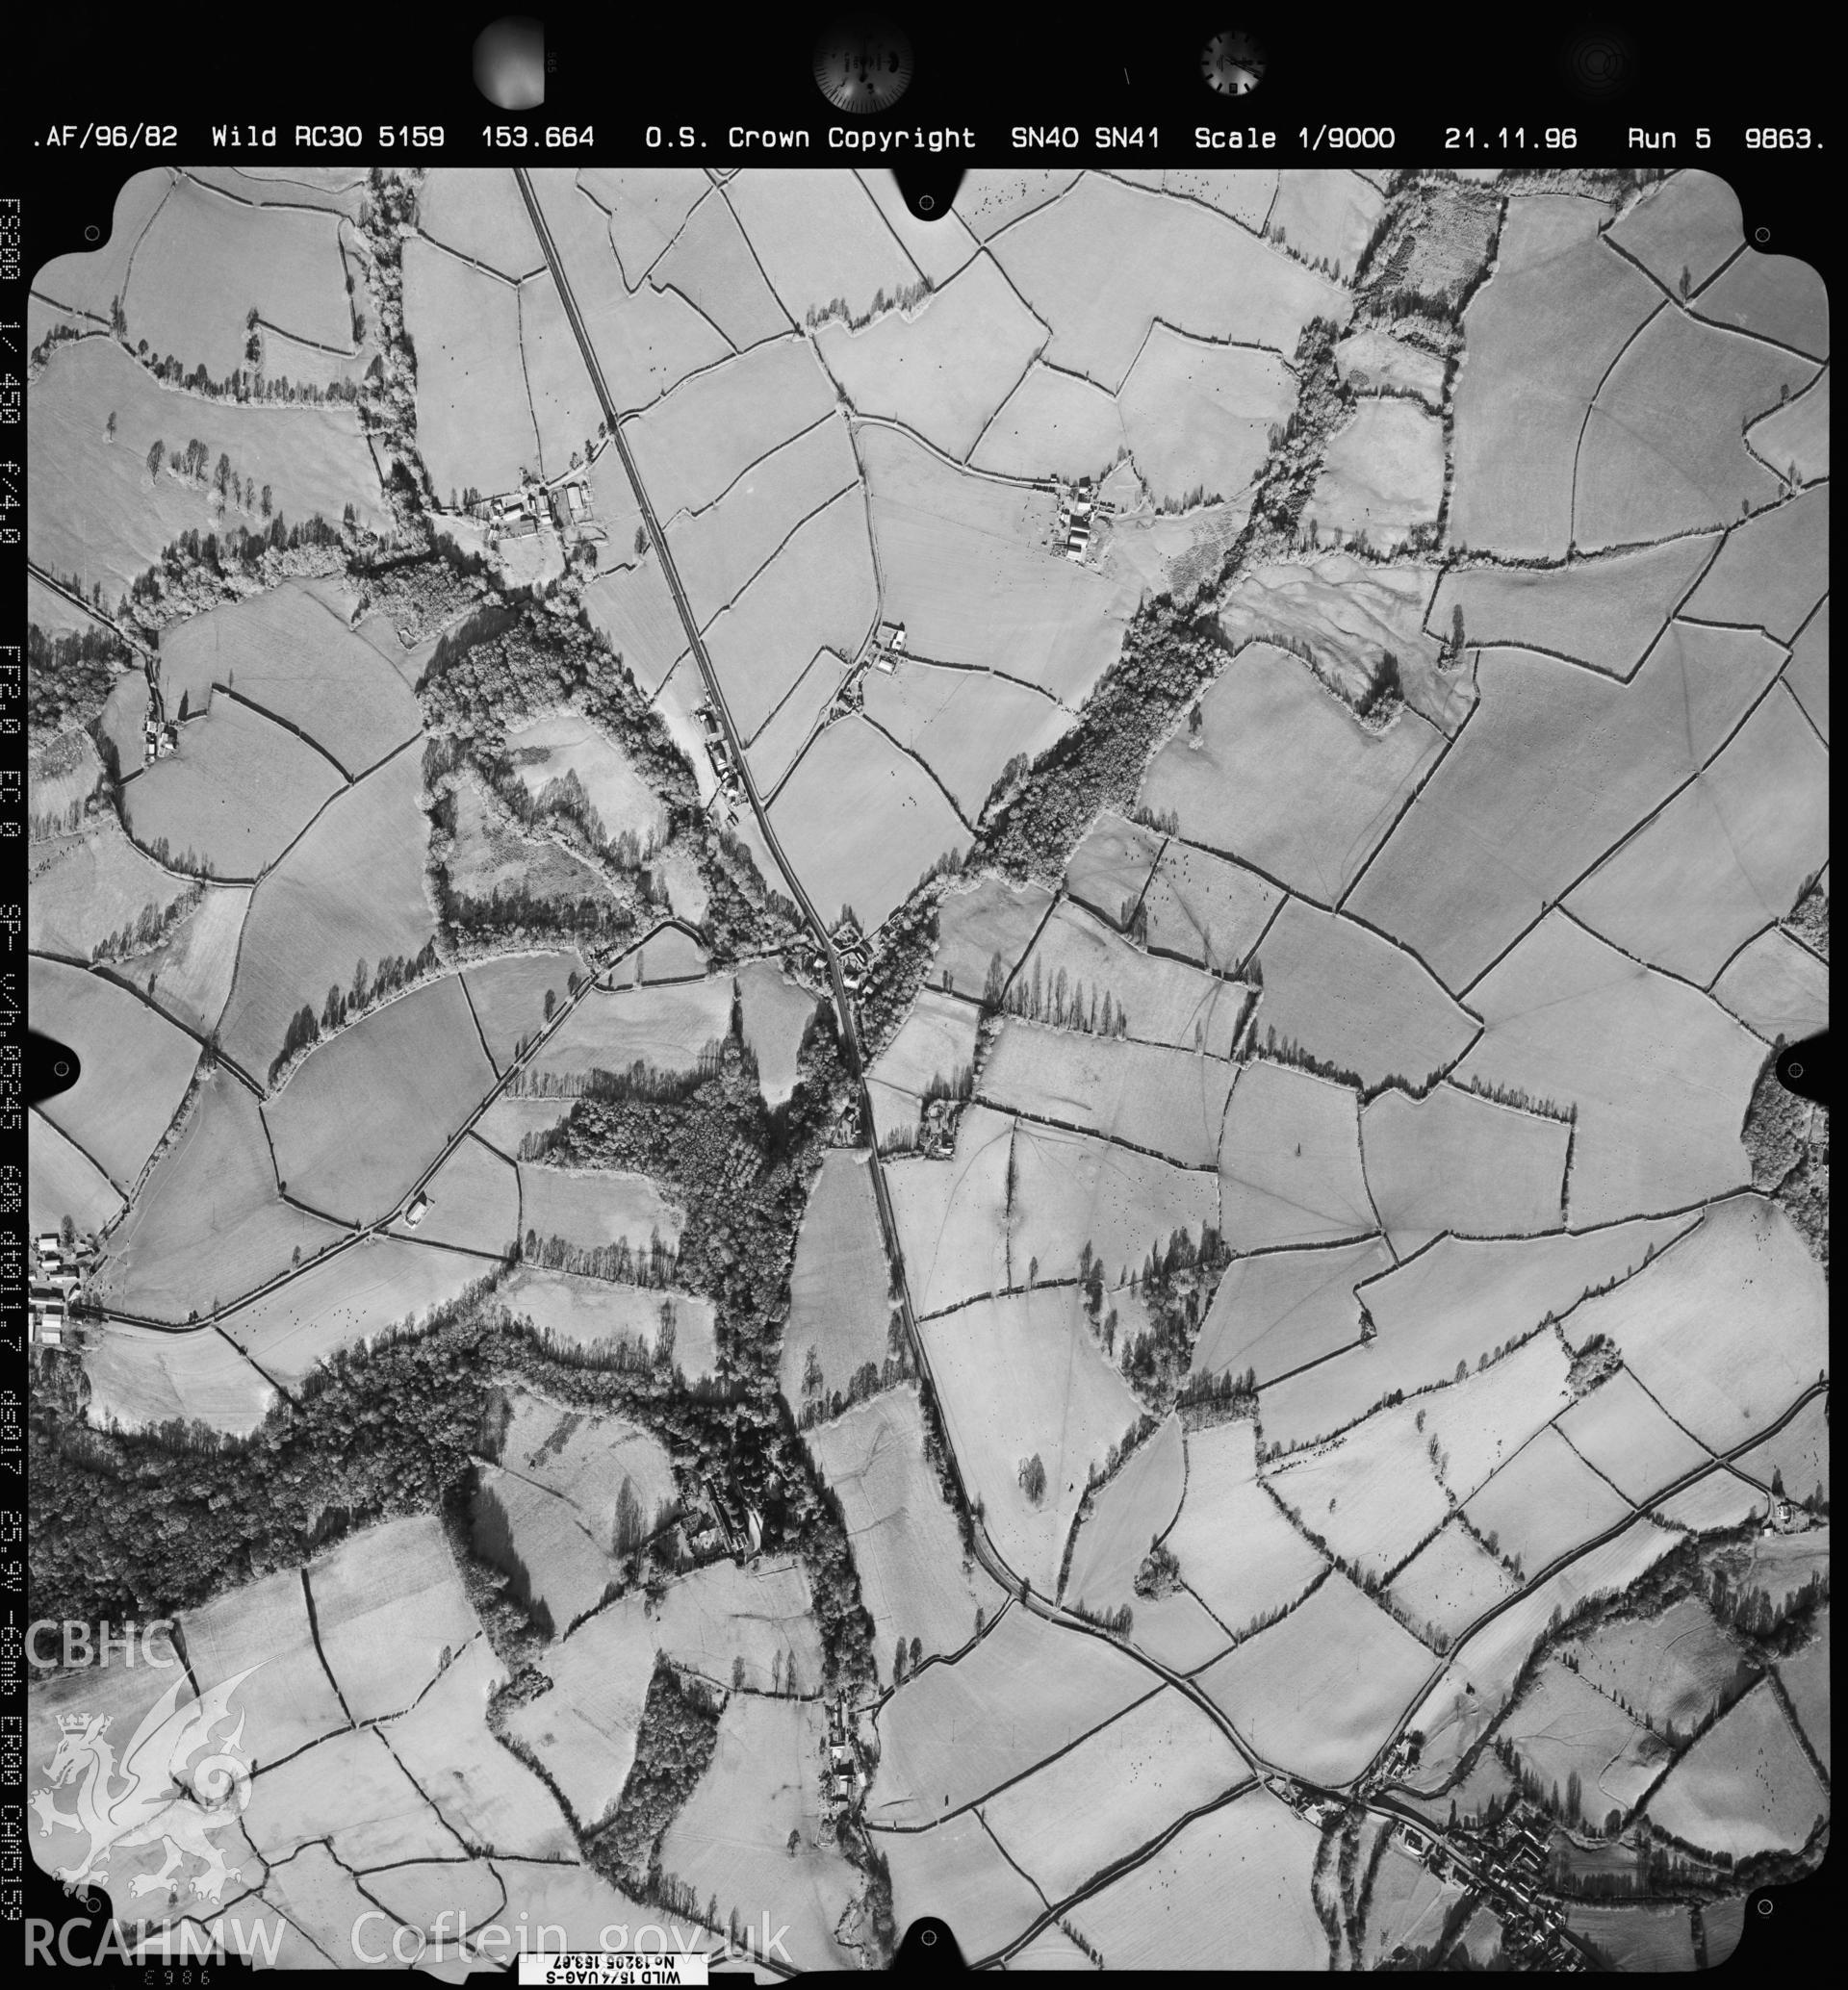 Digitized copy of an aerial photograph showing Pontantwn area, south-east of Carmarthen, taken by Ordnance Survey, 1996